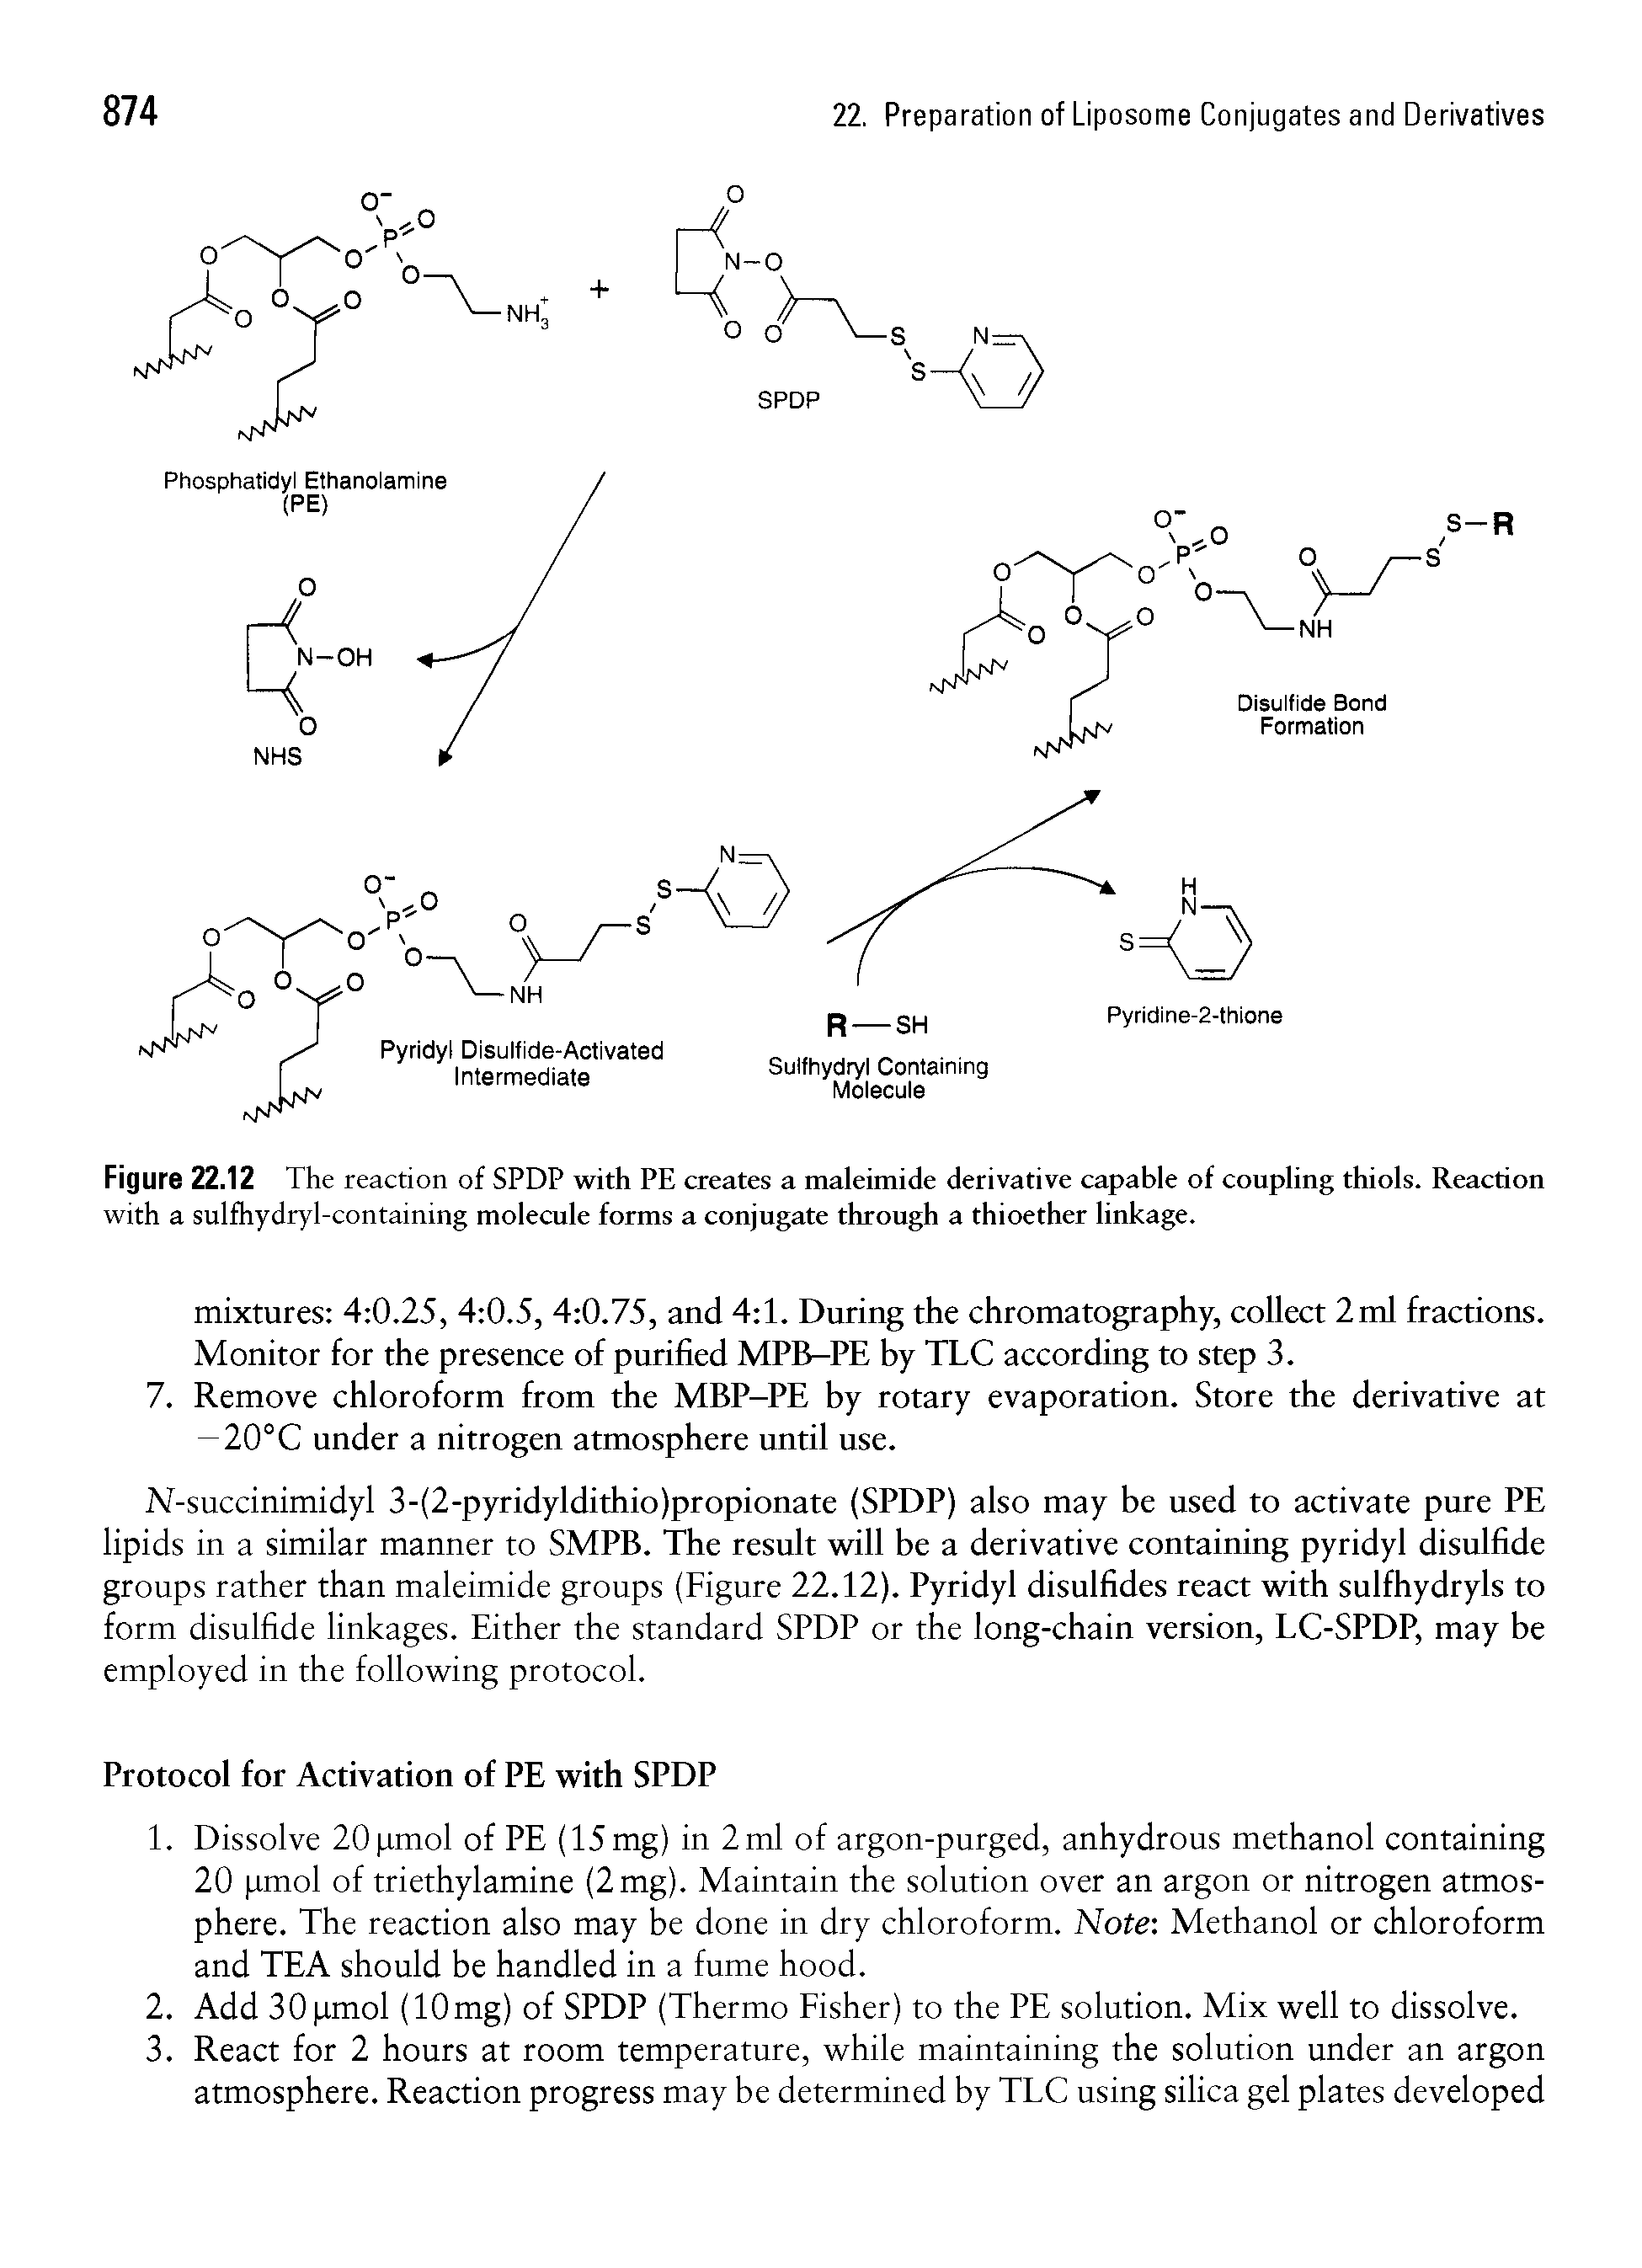 Figure 22.12 The reaction of SPDP with PE creates a maleimide derivative capable of coupling thiols. Reaction with a sulfhydryl-containing molecule forms a conjugate through a thioether linkage.